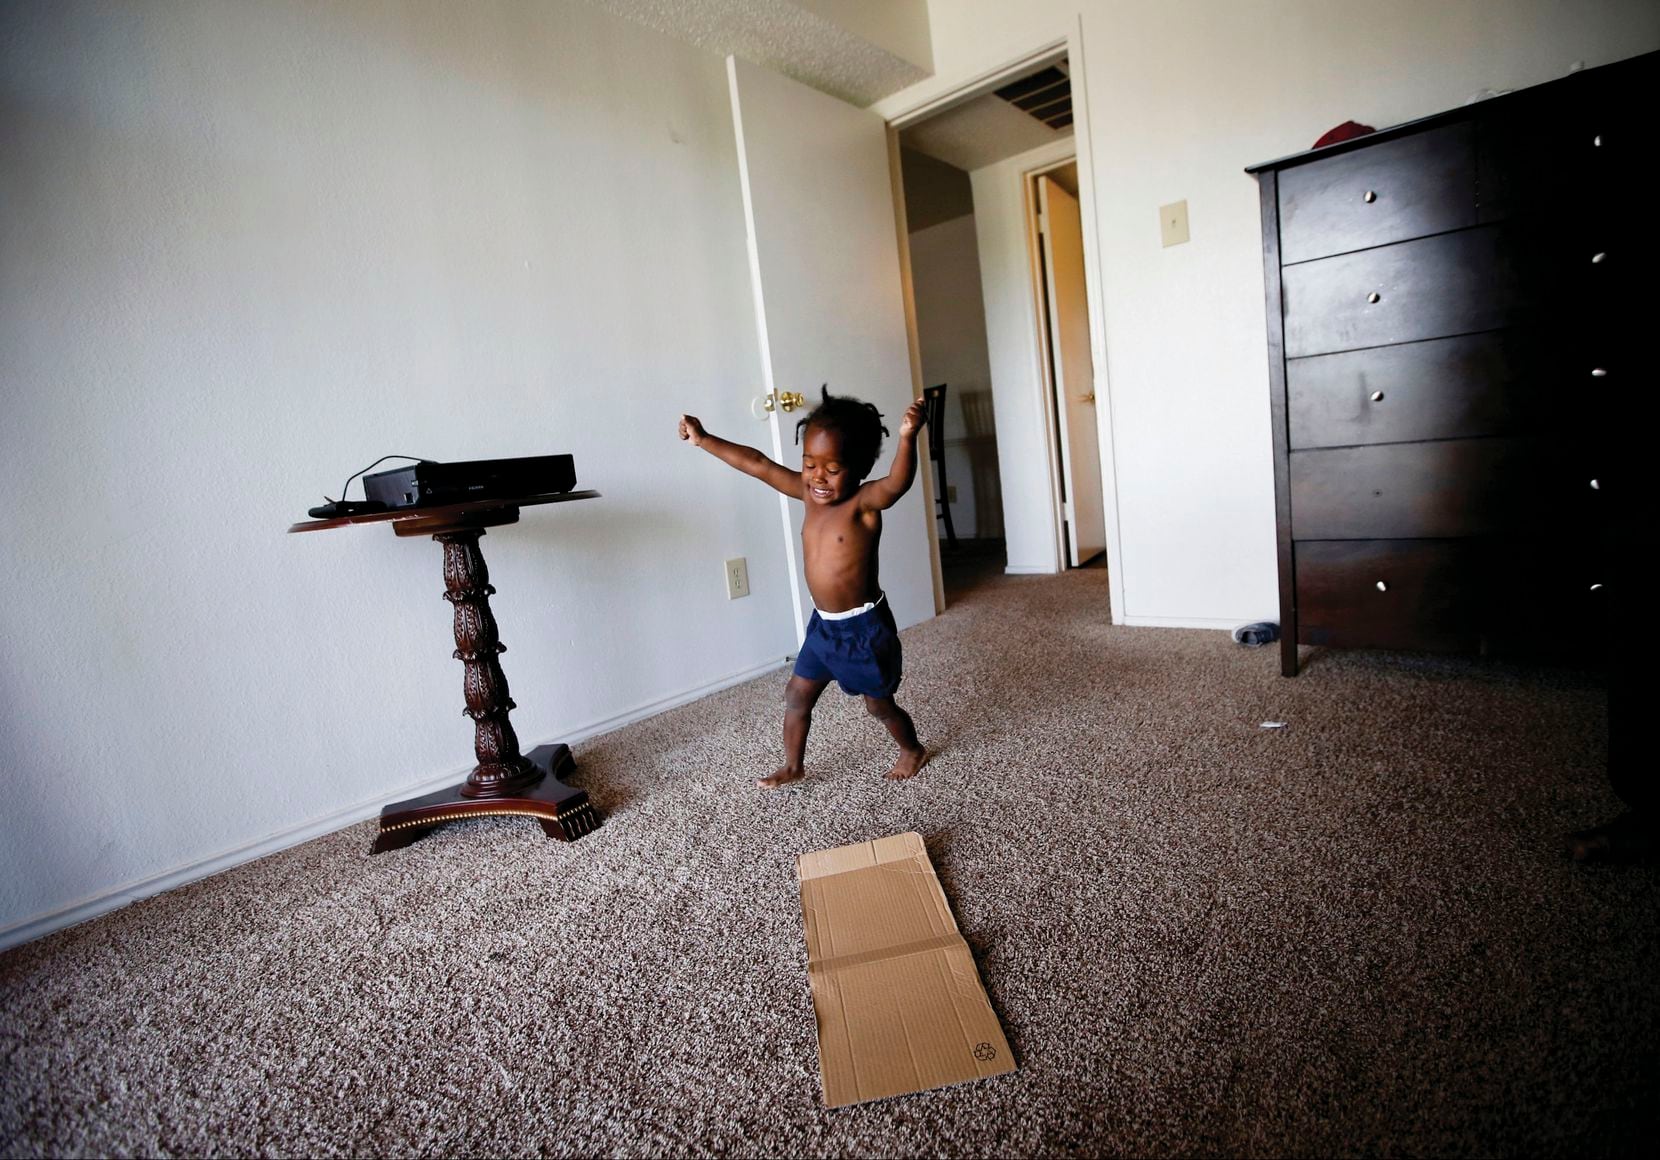 Jordan Miller, 2, runs in circles at his new apartment in Dallas. His father, Joshua Miller, said the new space has his son acting like a 2-year-old again. Before moving into the one-bedroom unit, the Millers lived in a small room at the Family First Men's Shelter.